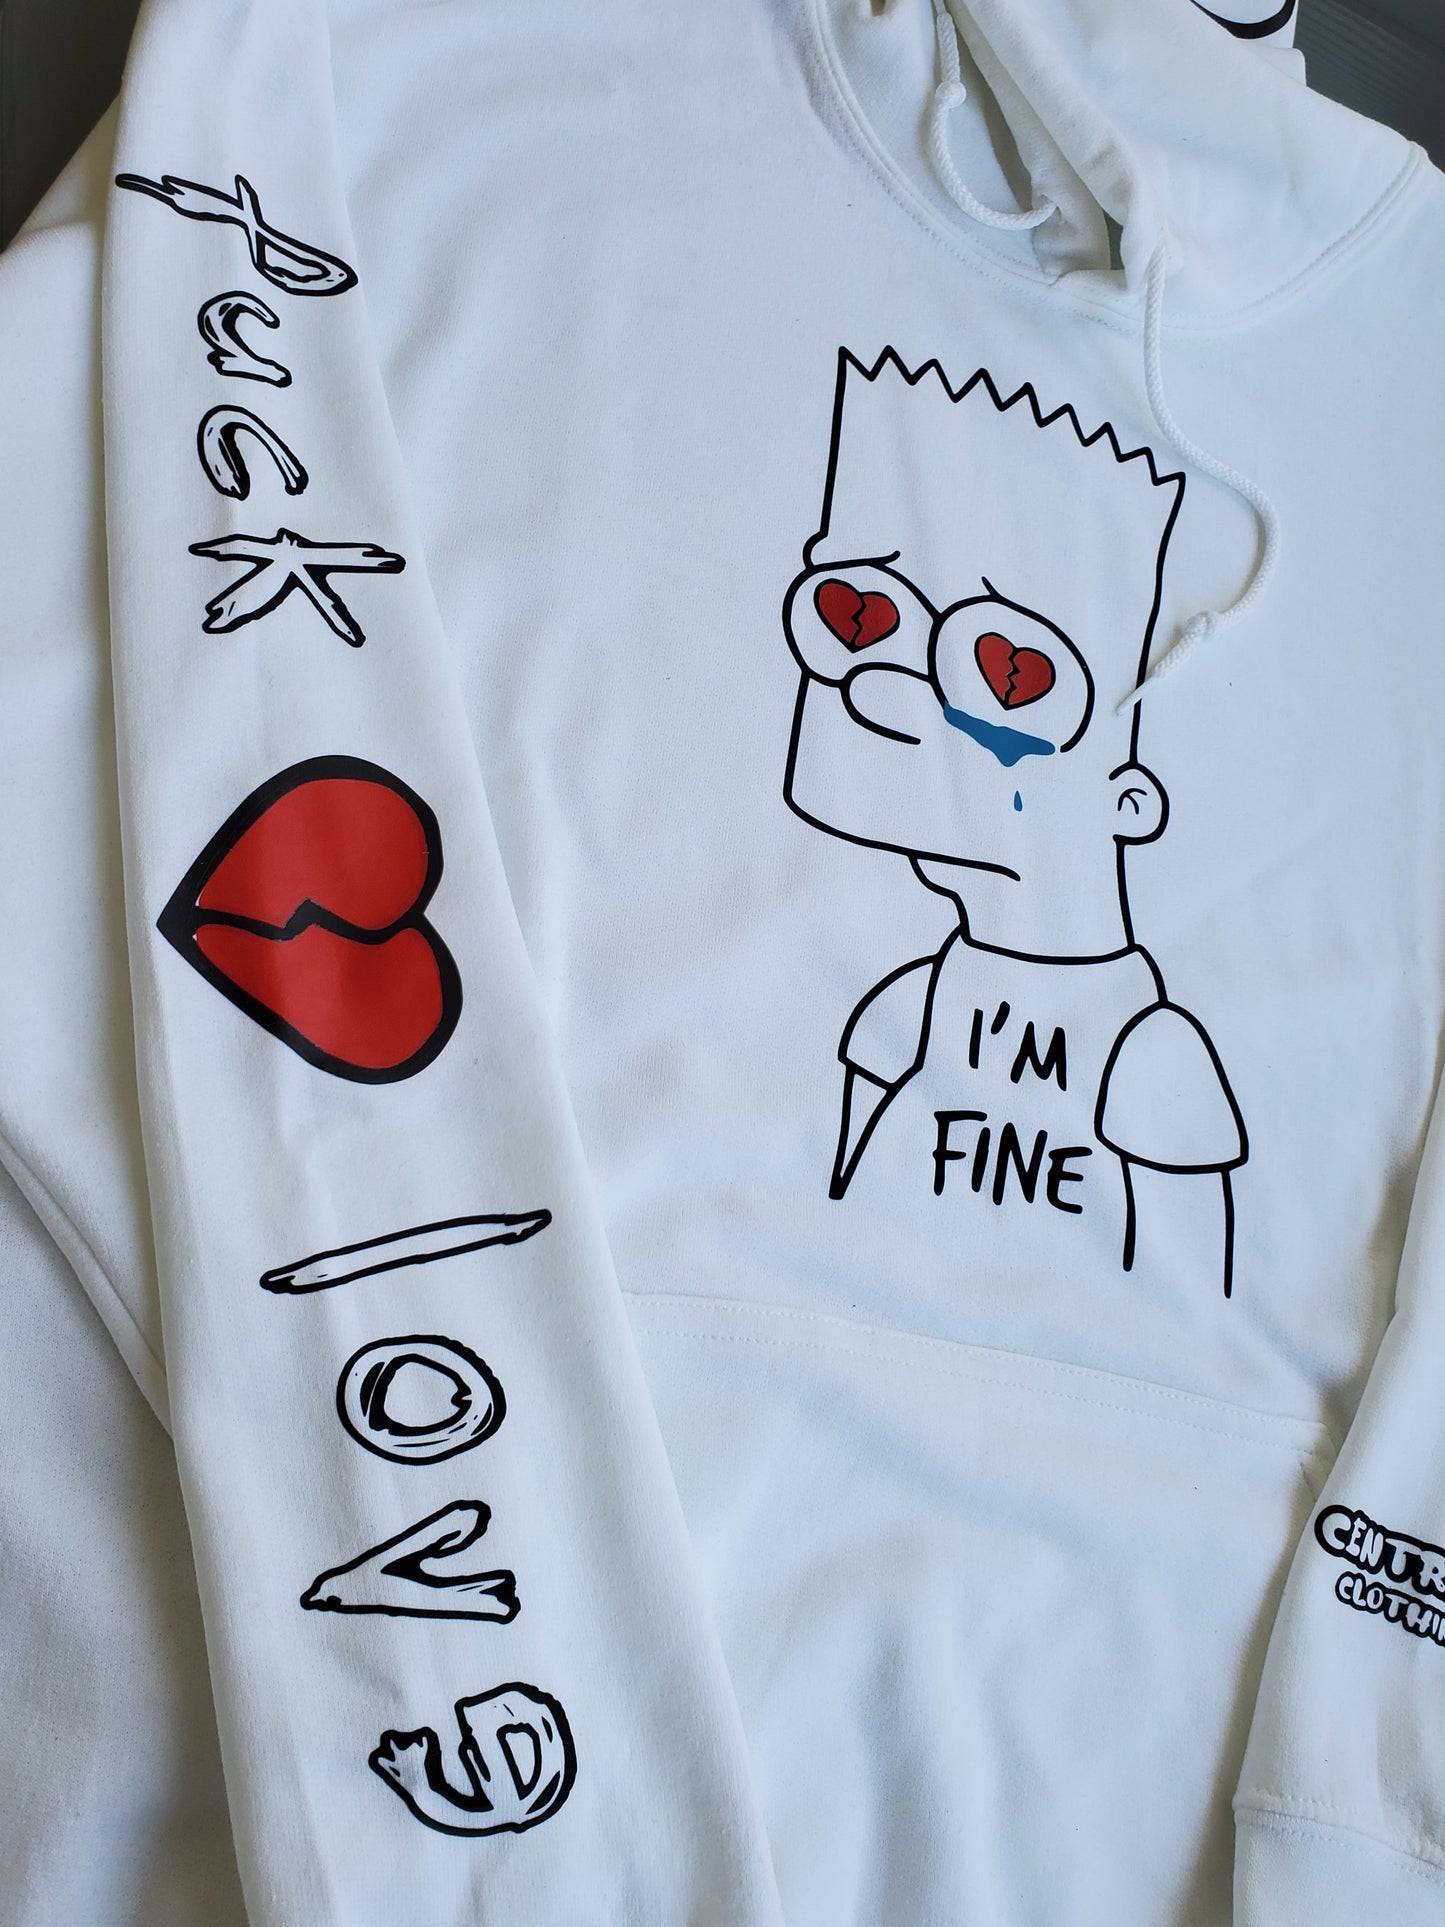 F@$% Love Hoodie - Centre Ave Clothing Co.